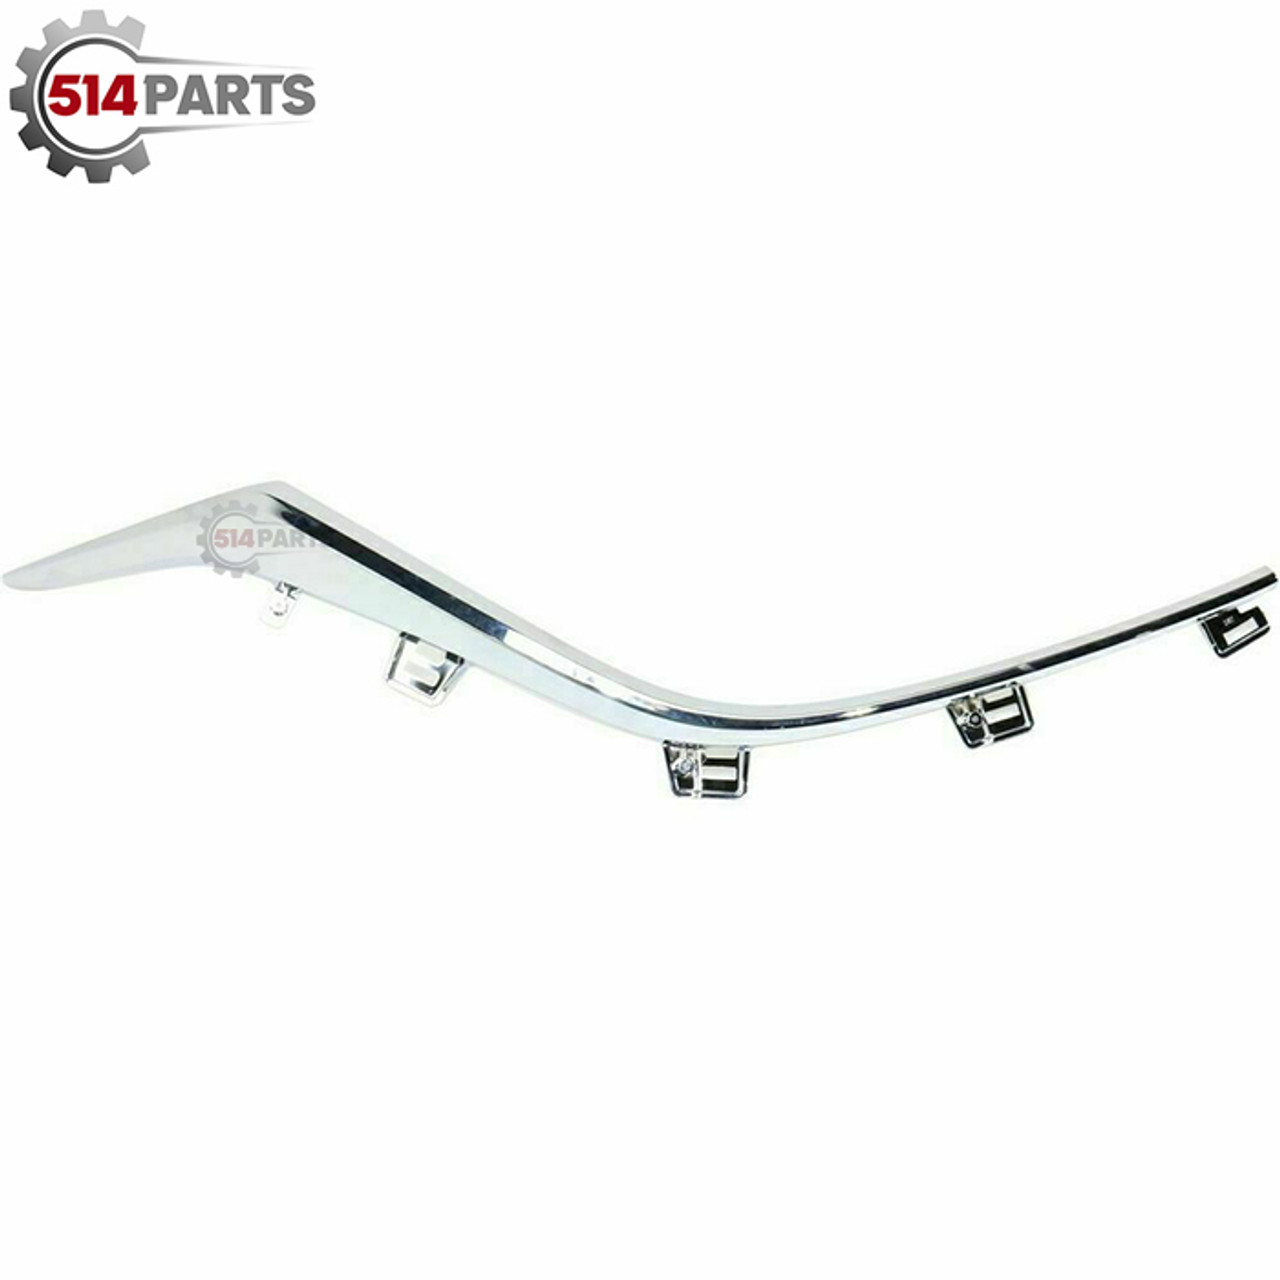 2014 - 2016 MAZDA 3 and MAZDA 3 SPORT FRONT BUMPER COVER CHROME MOLDING - MOULURE CHROMEE pour PARE-CHOCS AVANT